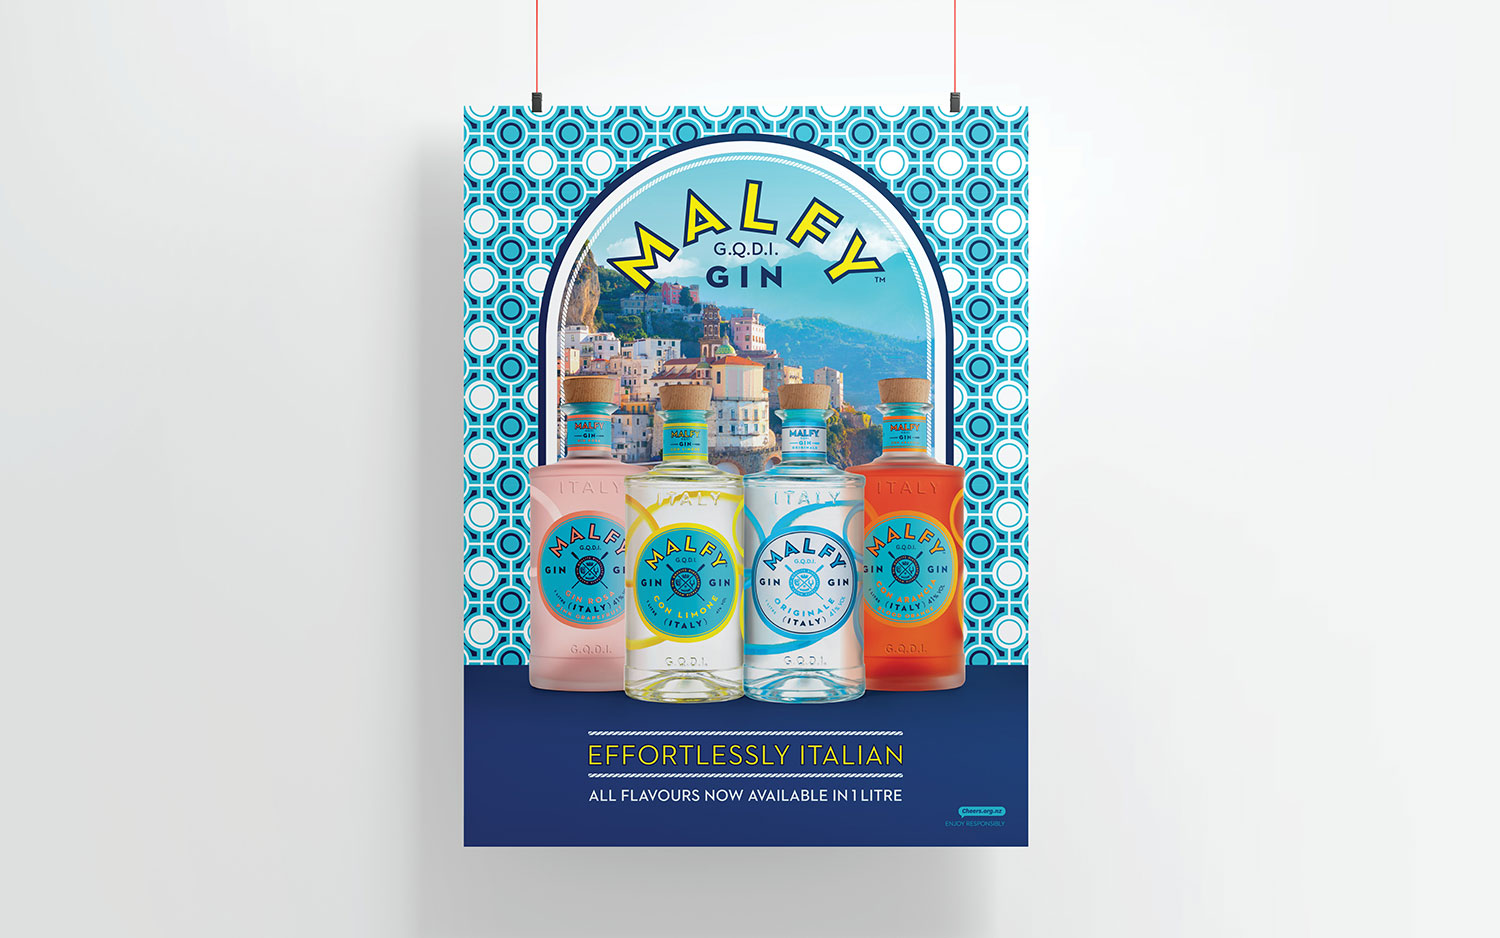 Poster showing the Malfy Gin range